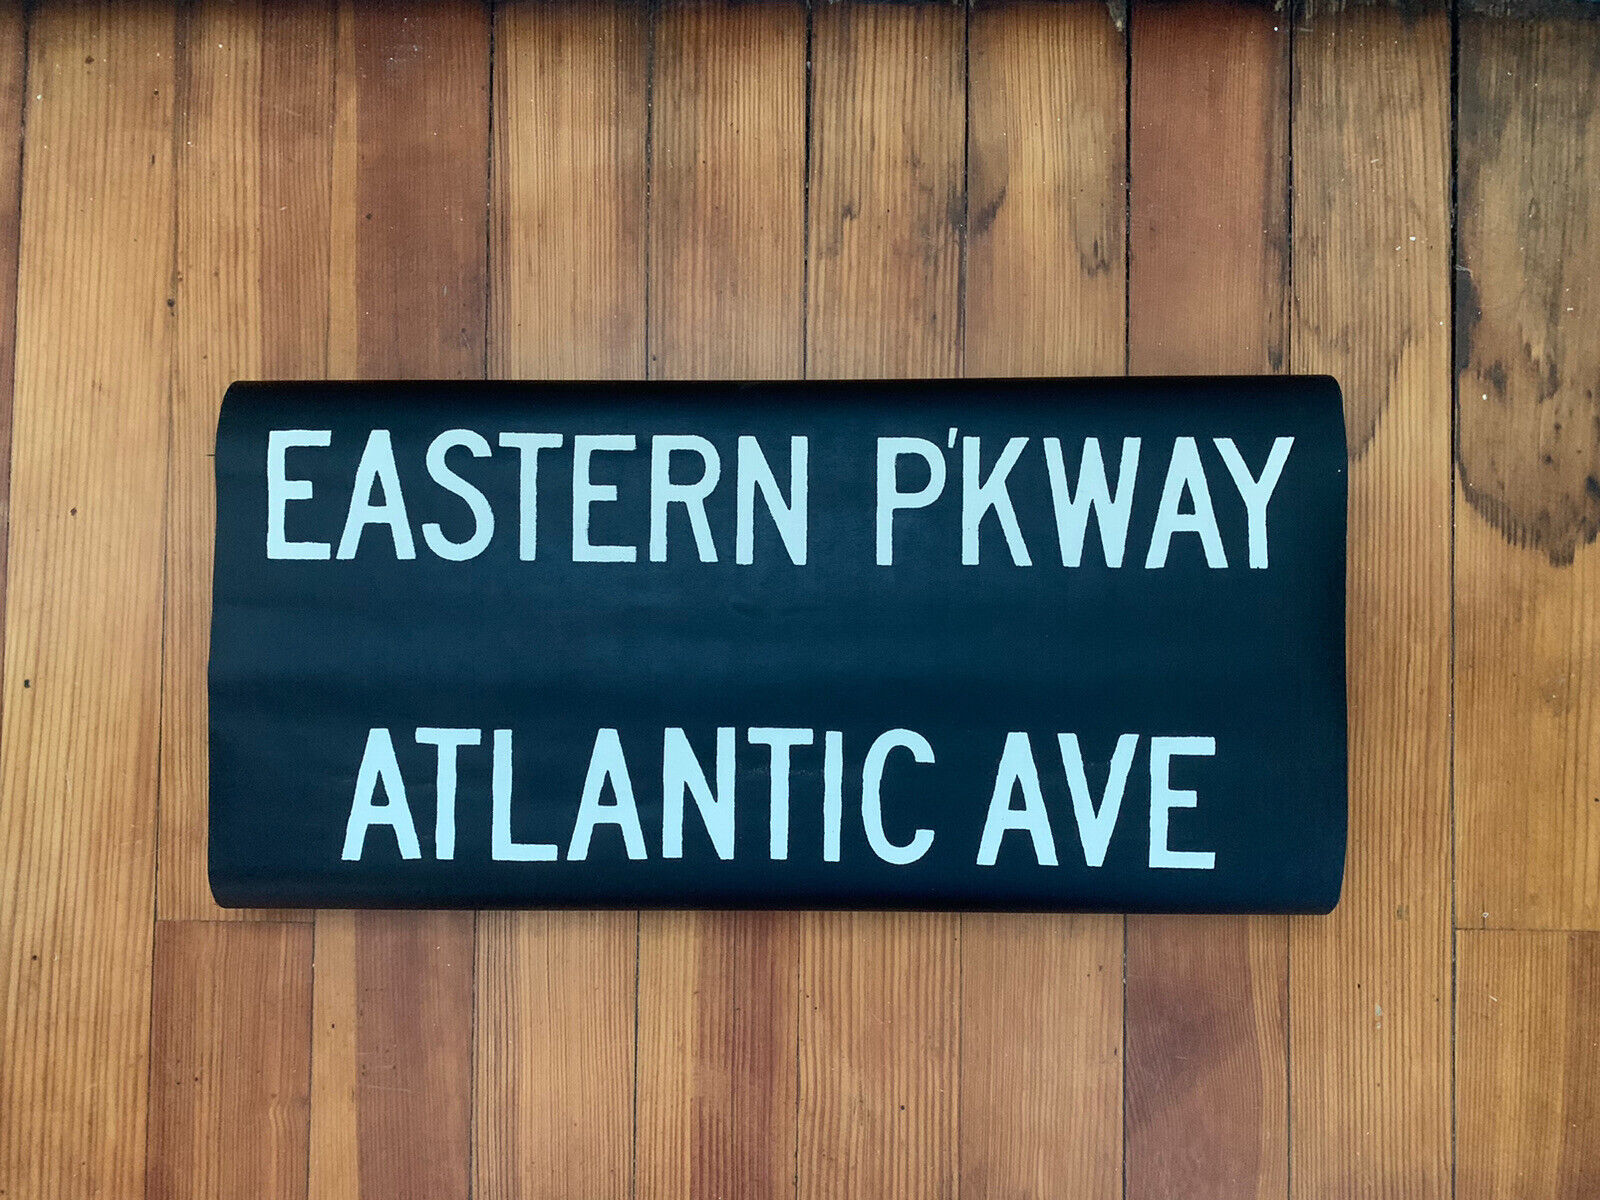 NY NYC SUBWAY ROLL SIGN EASTERN PARKWAY ATLANTIC BARCLAYS CENTER BROOKLYN MUSEUM